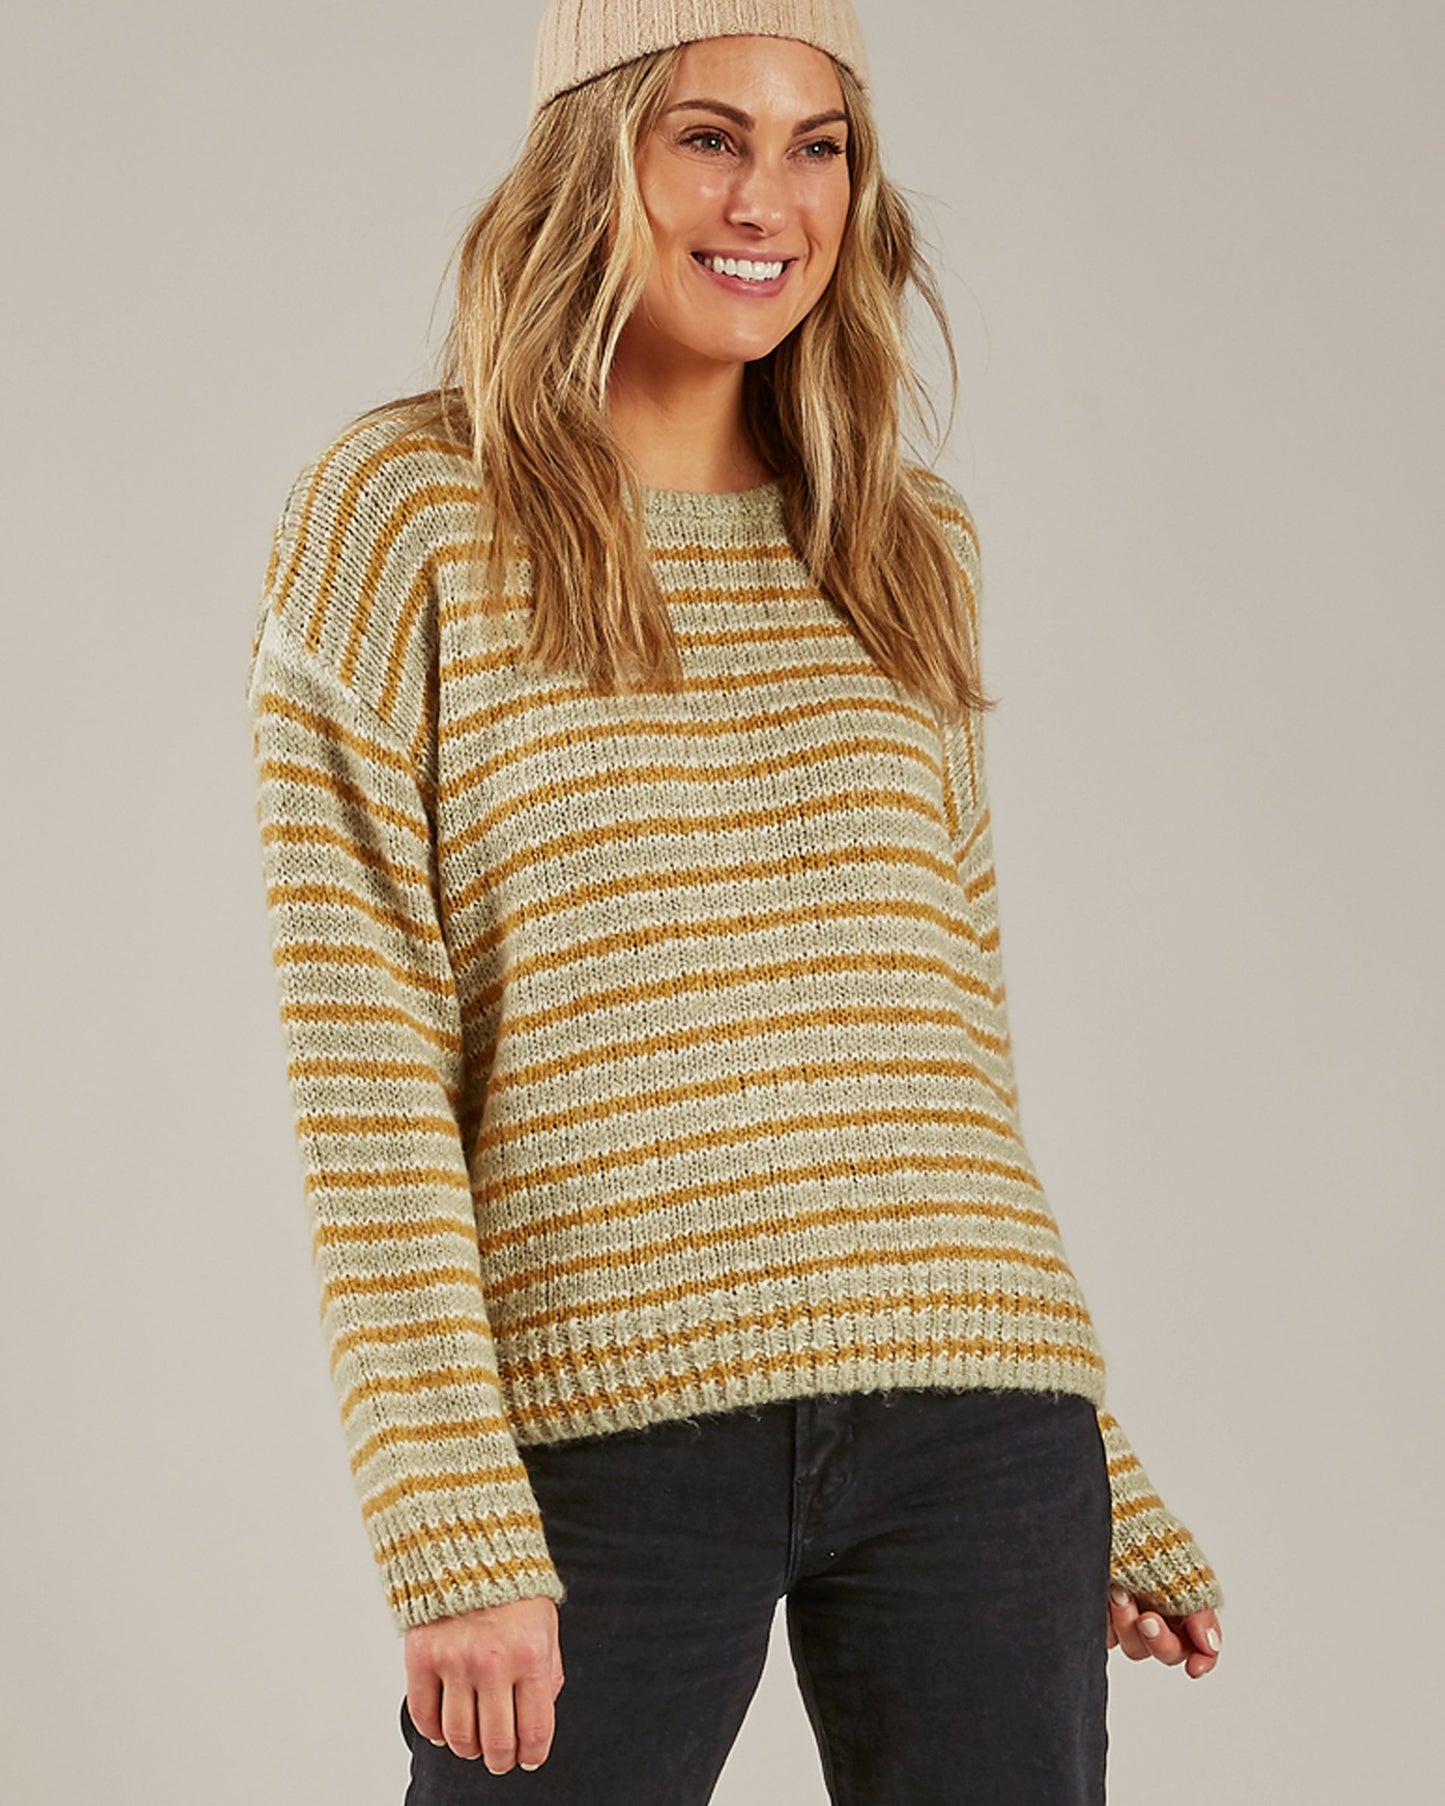 Last One - Size Large: Aspen Sweater (Adult) - Agave / Gold stripe